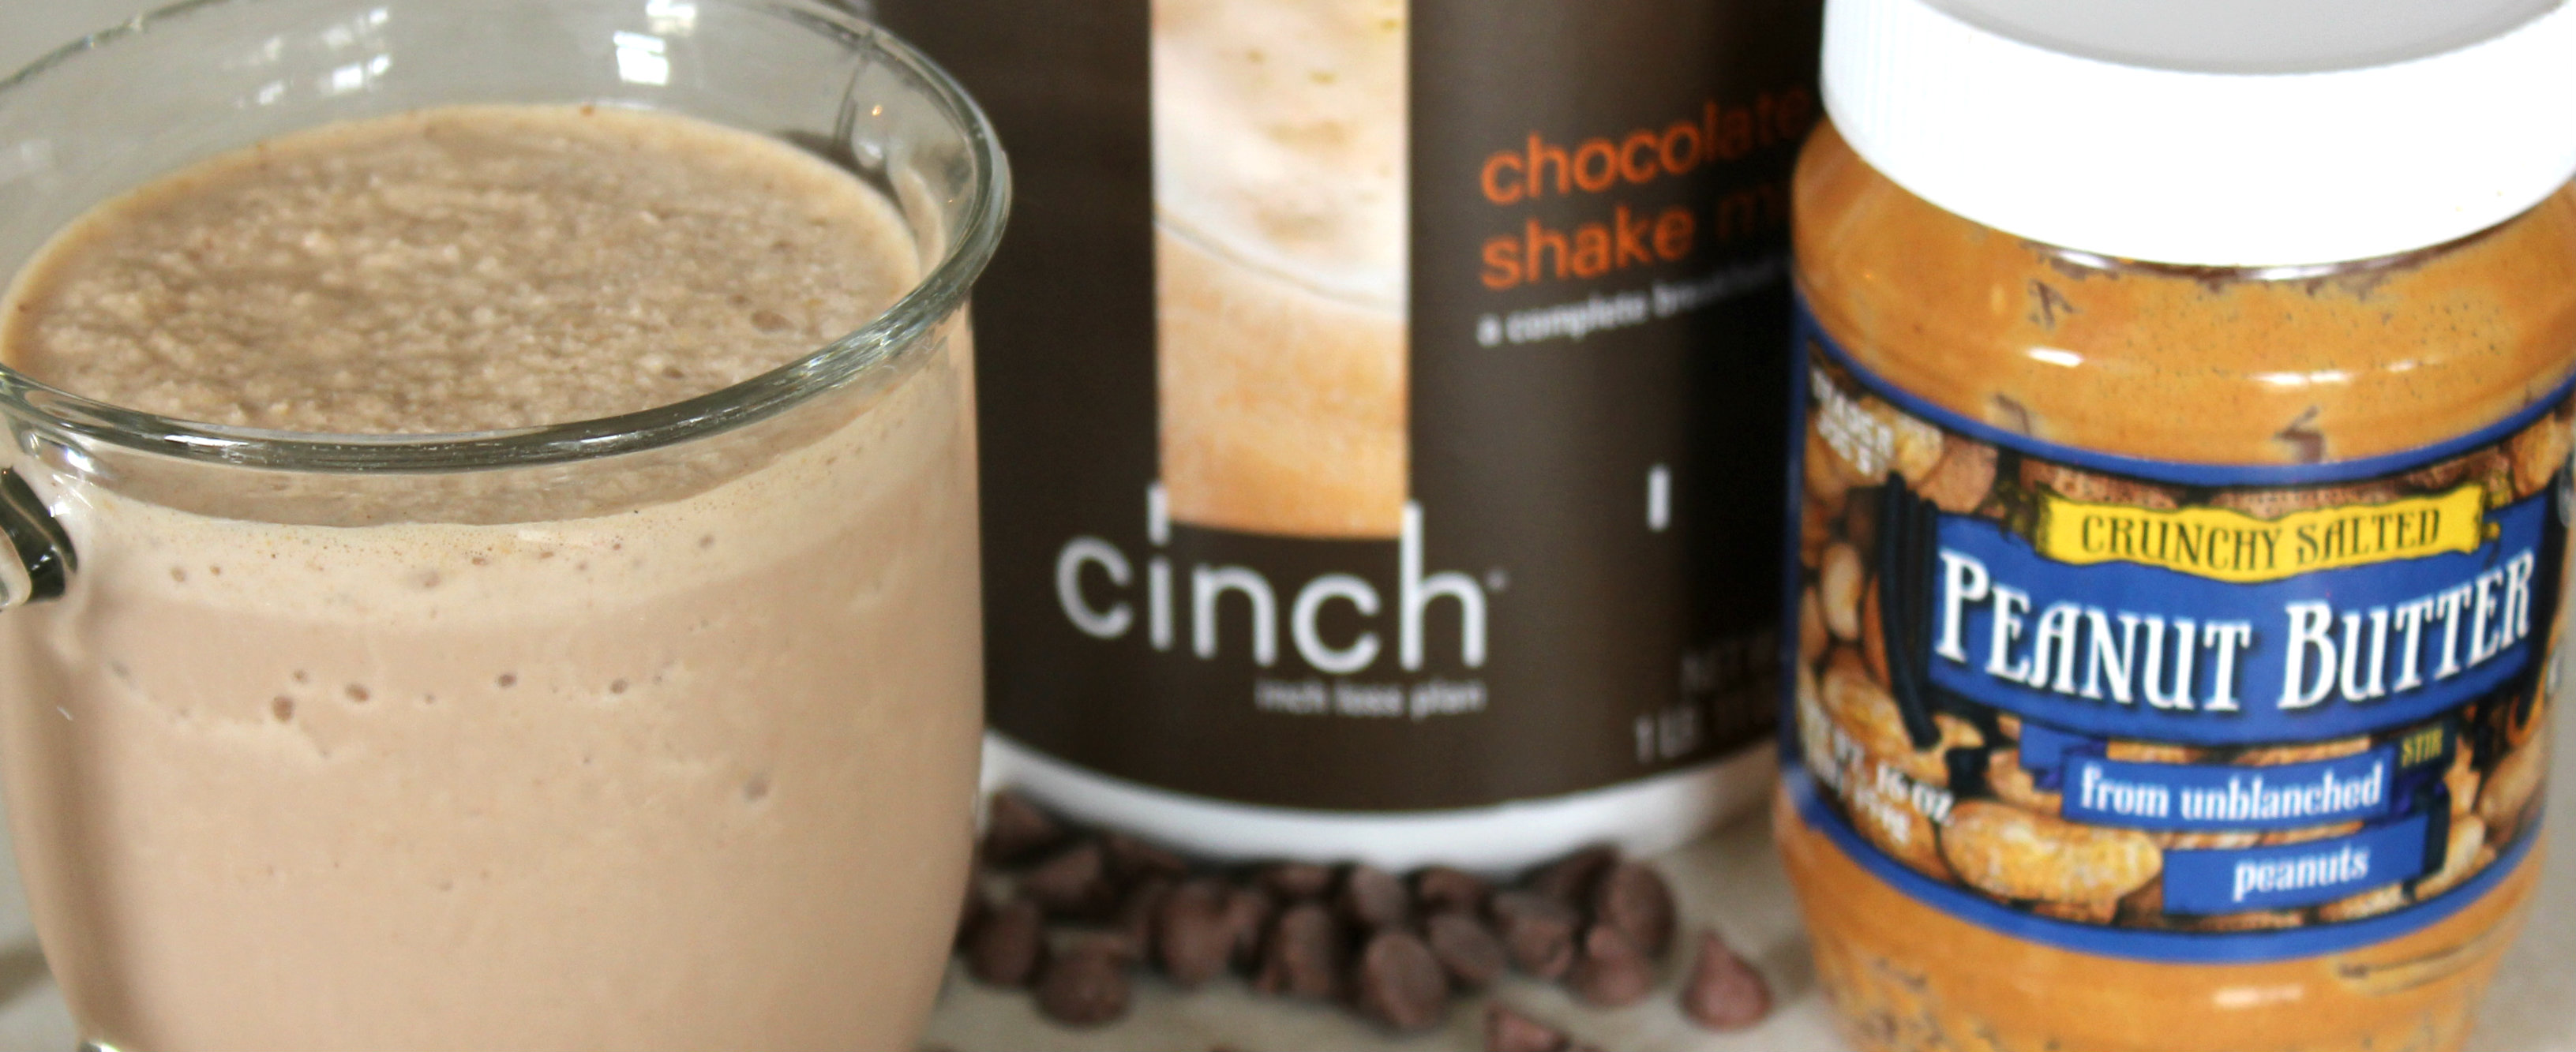 For All You Chocolate Lovers Out There, This Smoothie is For You!